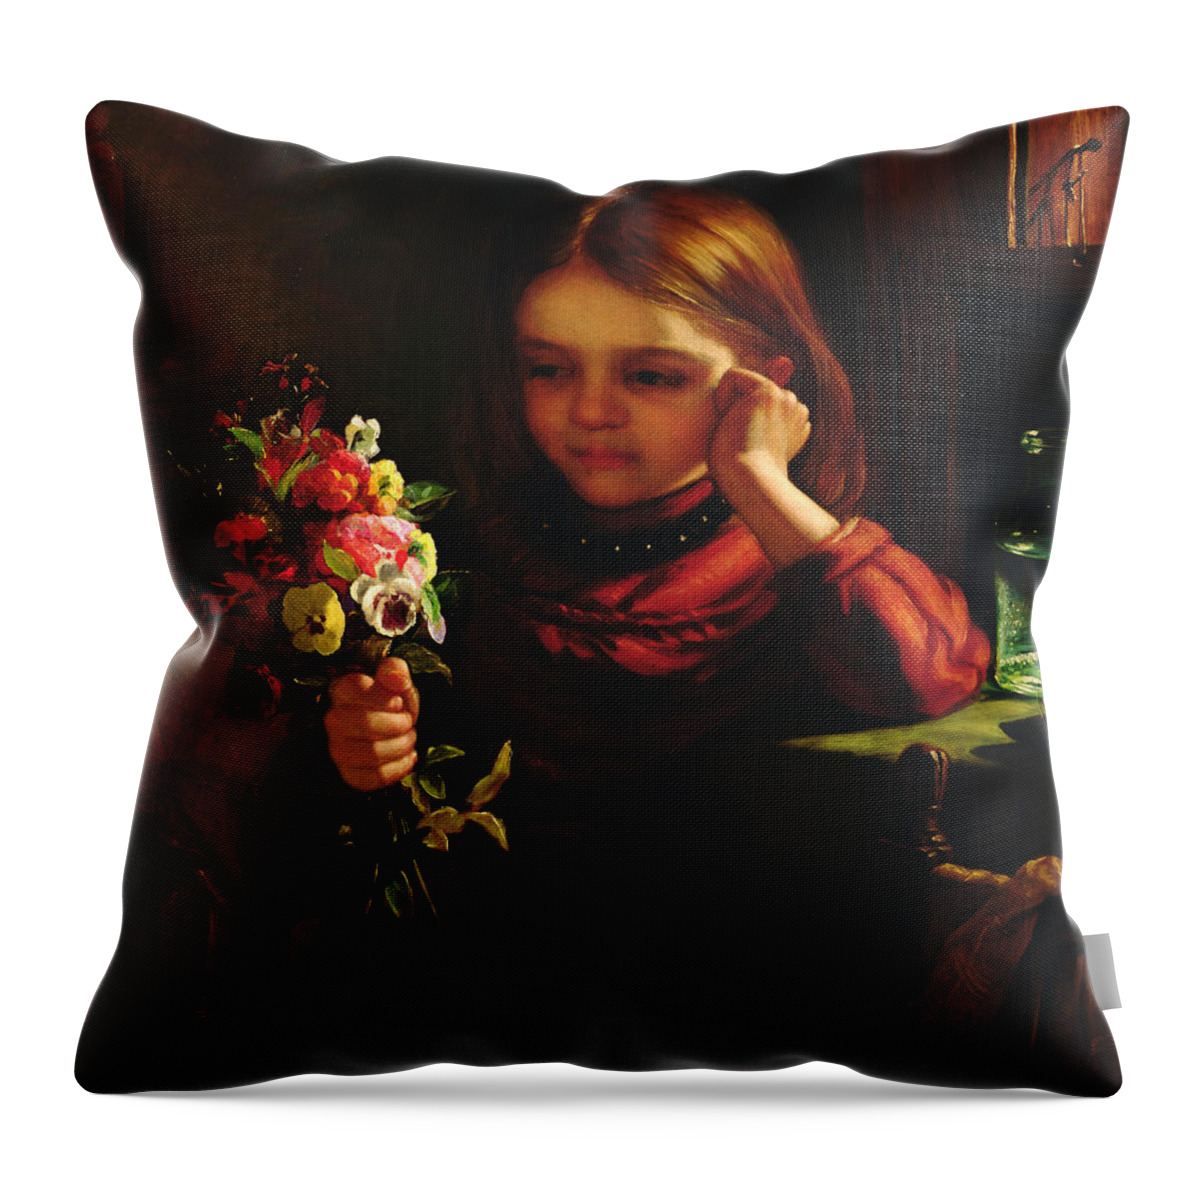 Girl With Flowers Throw Pillow featuring the painting Girl With Flowers by John Davidson